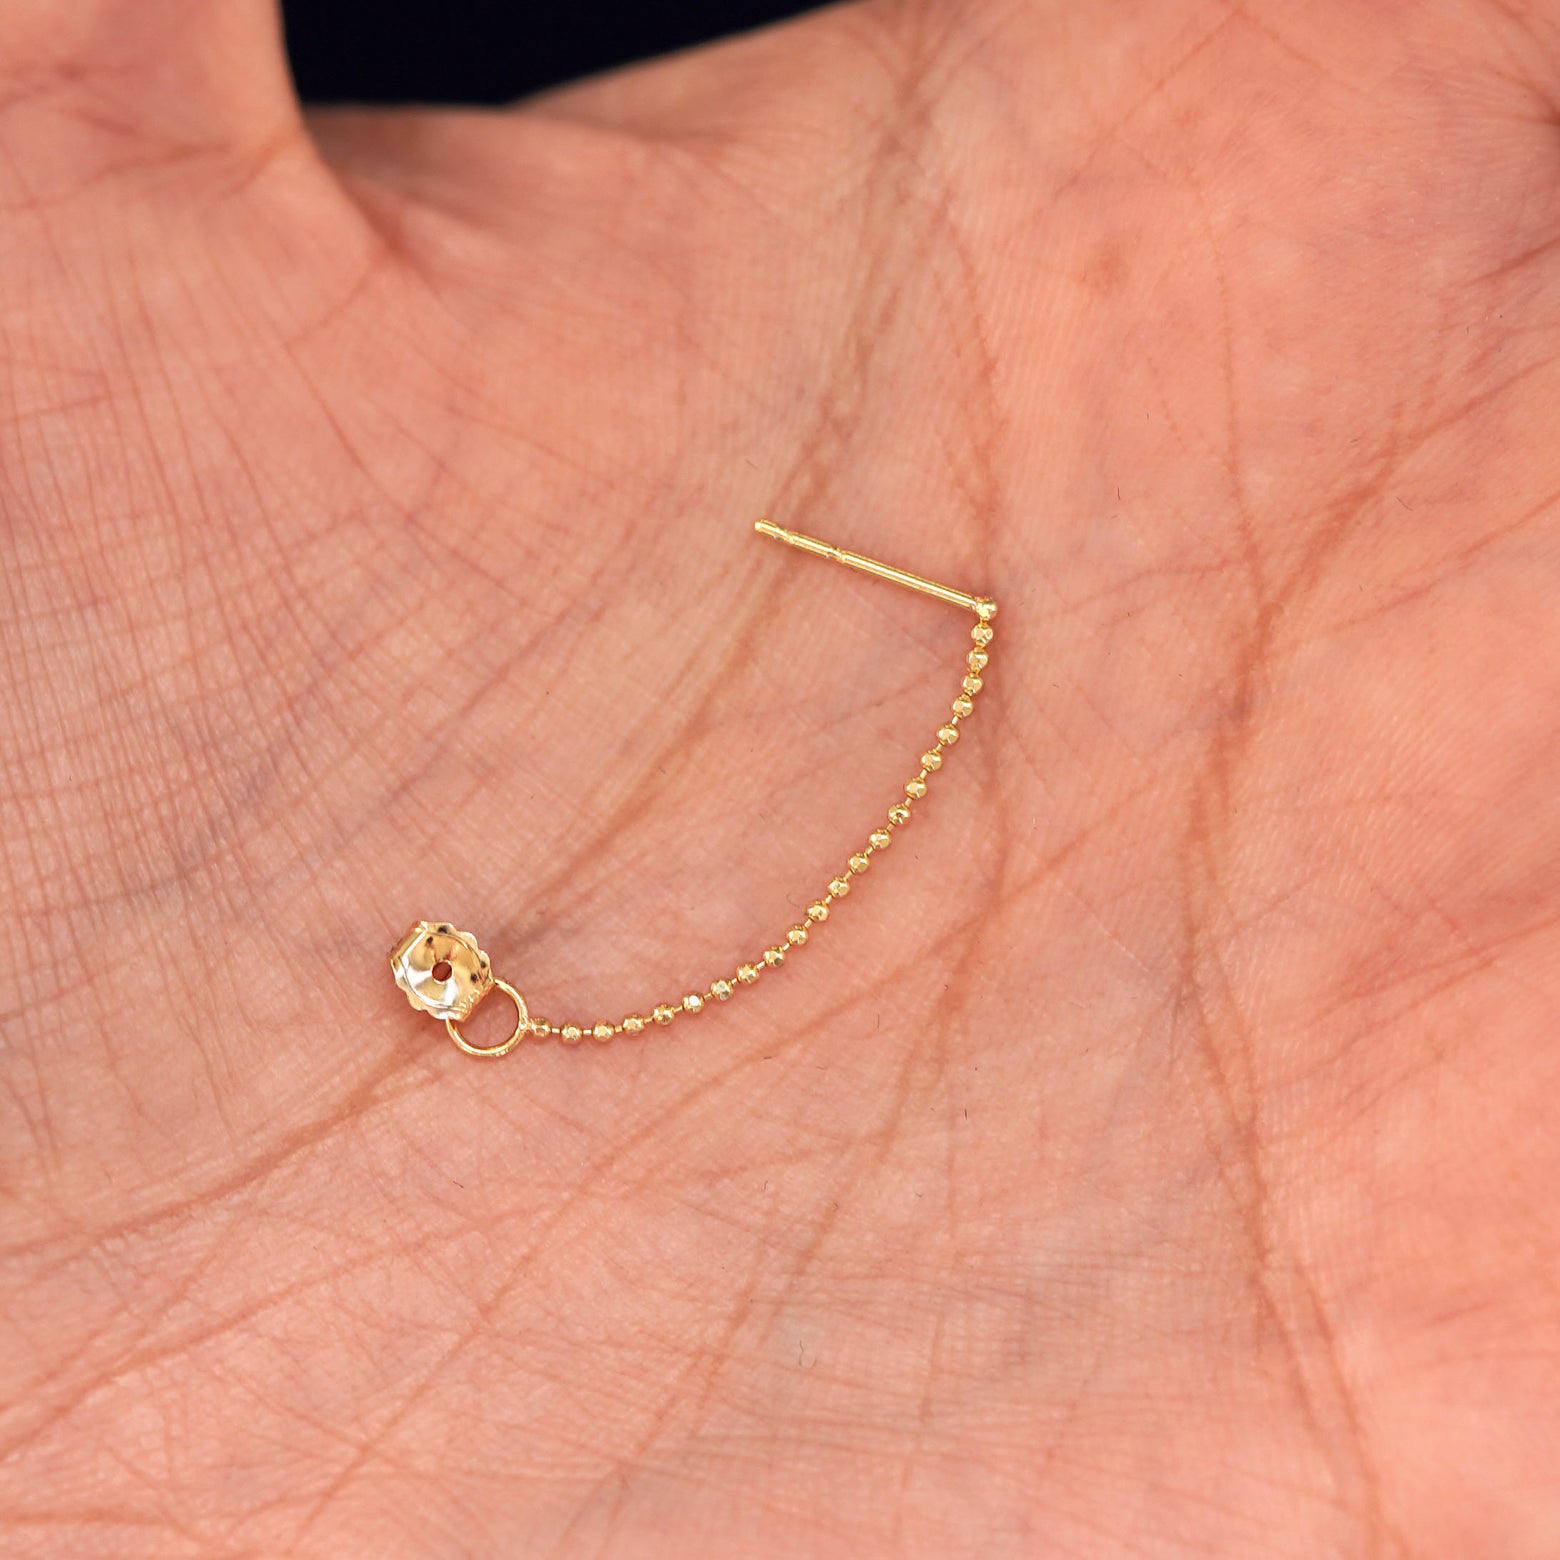 A solid yellow gold Chain Loop with the backing unattached to post sitting in a model's hand